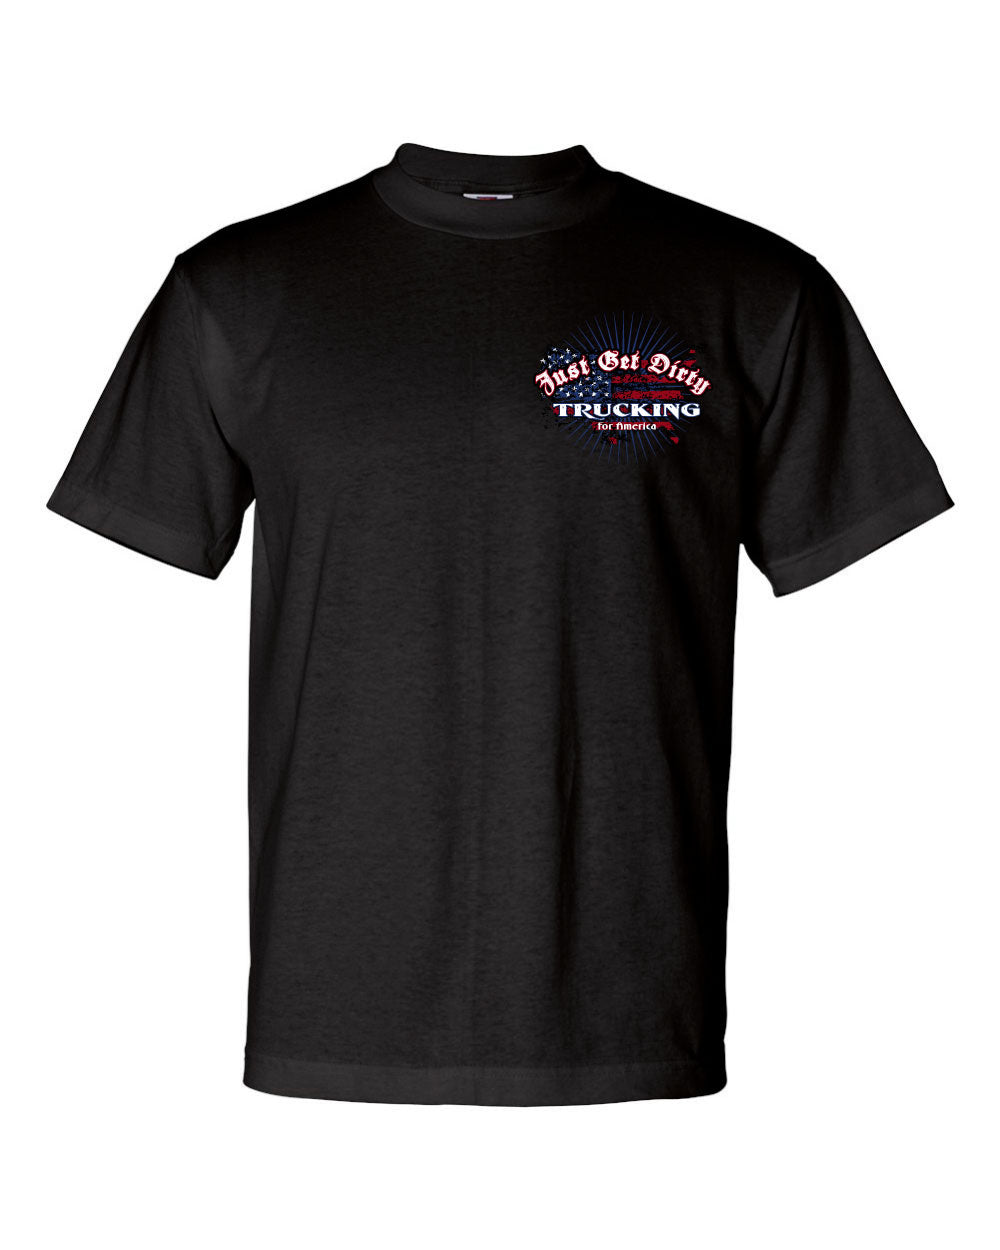 Kids Just Get Dirty 'Trucking for America' T-Shirt